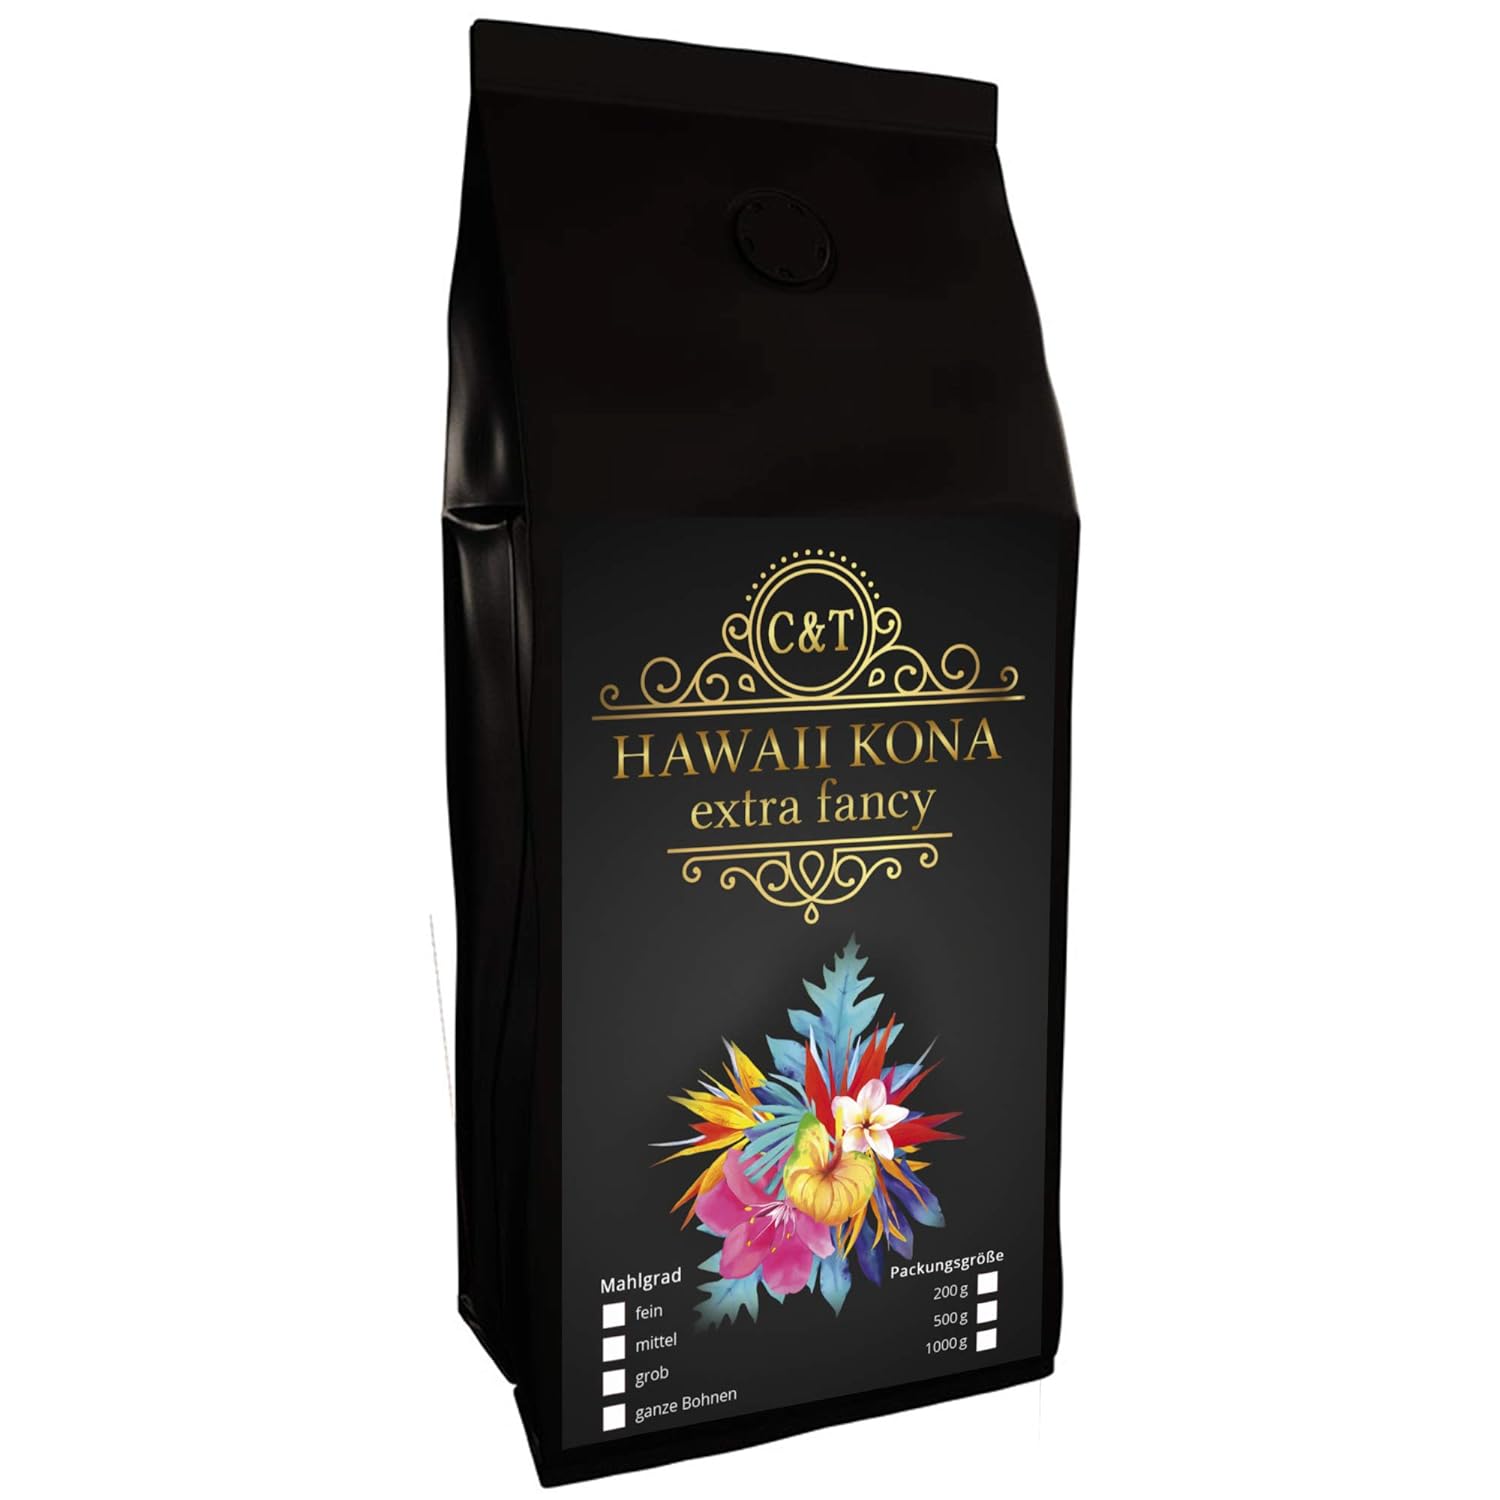 C&T Hawaii Kona coffee | 200g entire beans | The brown gold from Hawaii - one of the best coffees in the world